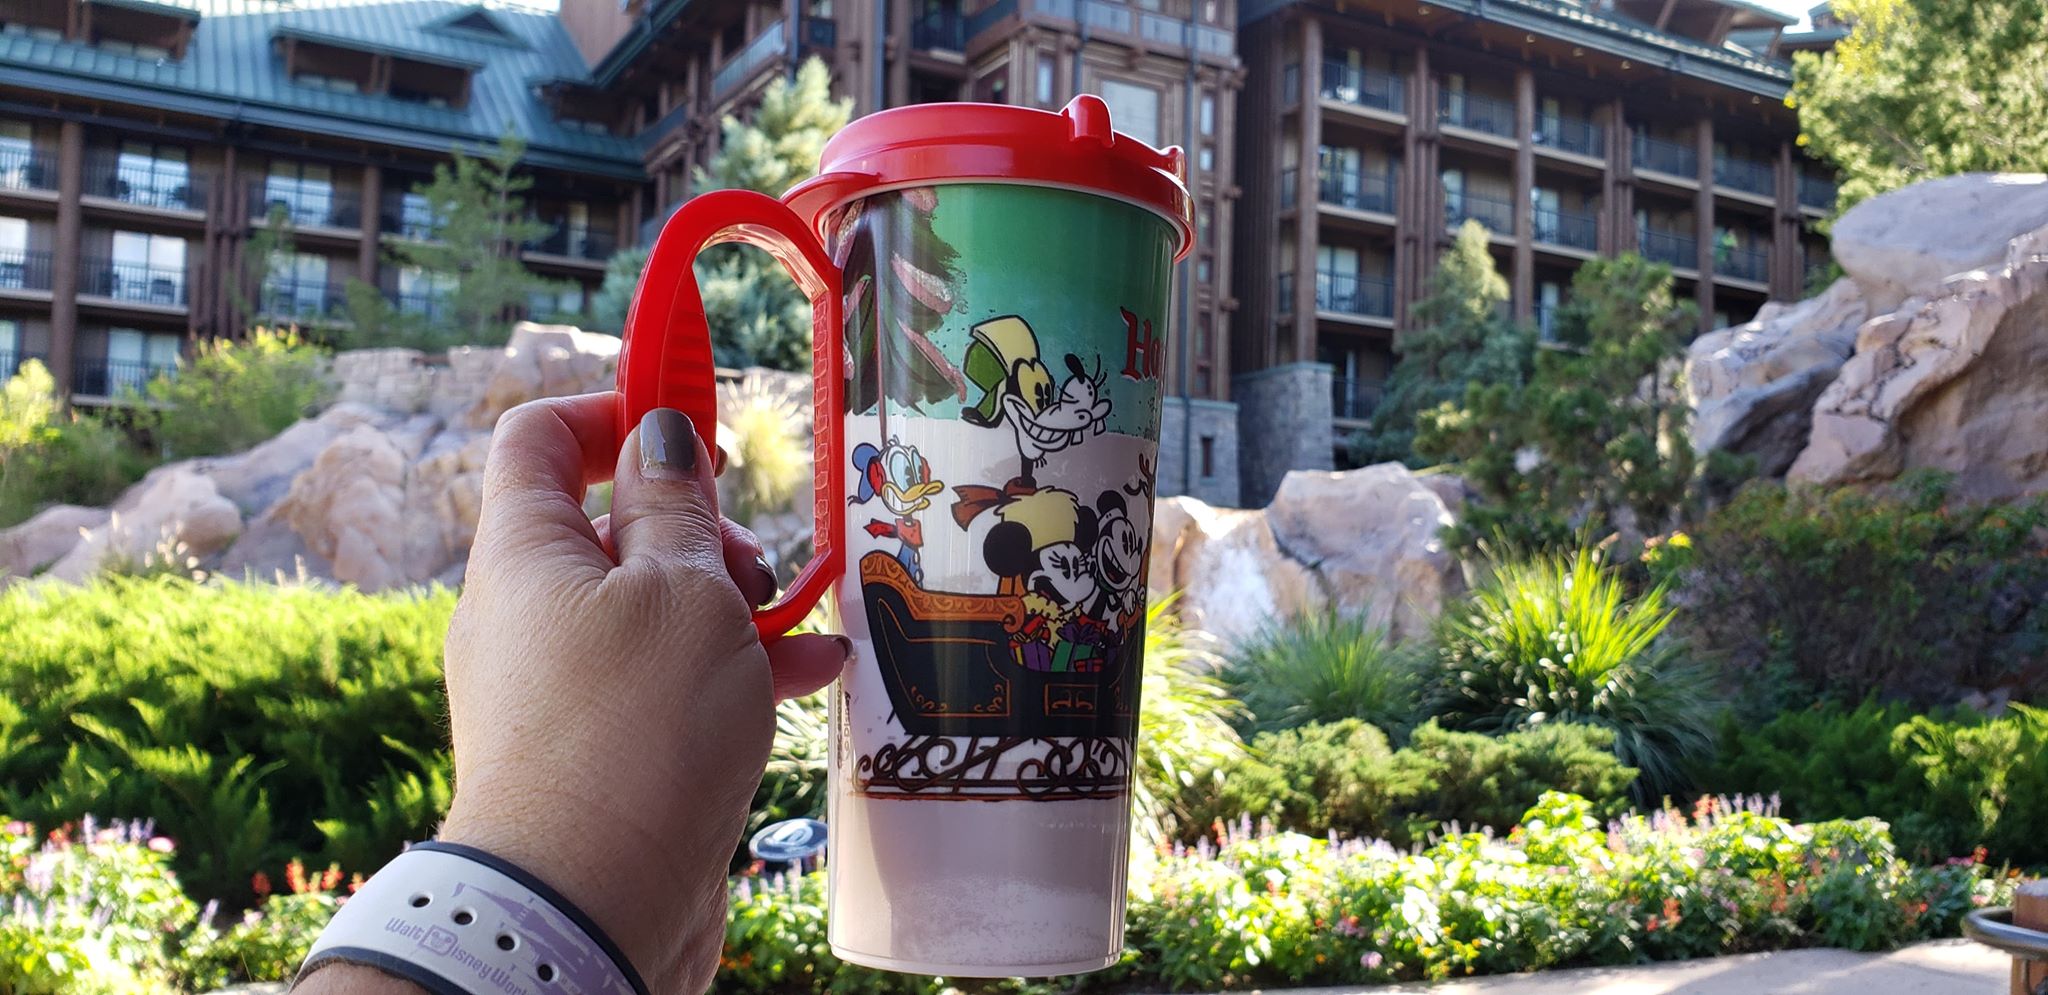 New Disney Resort Holiday Mug Lets You Refill With Festive Cheer